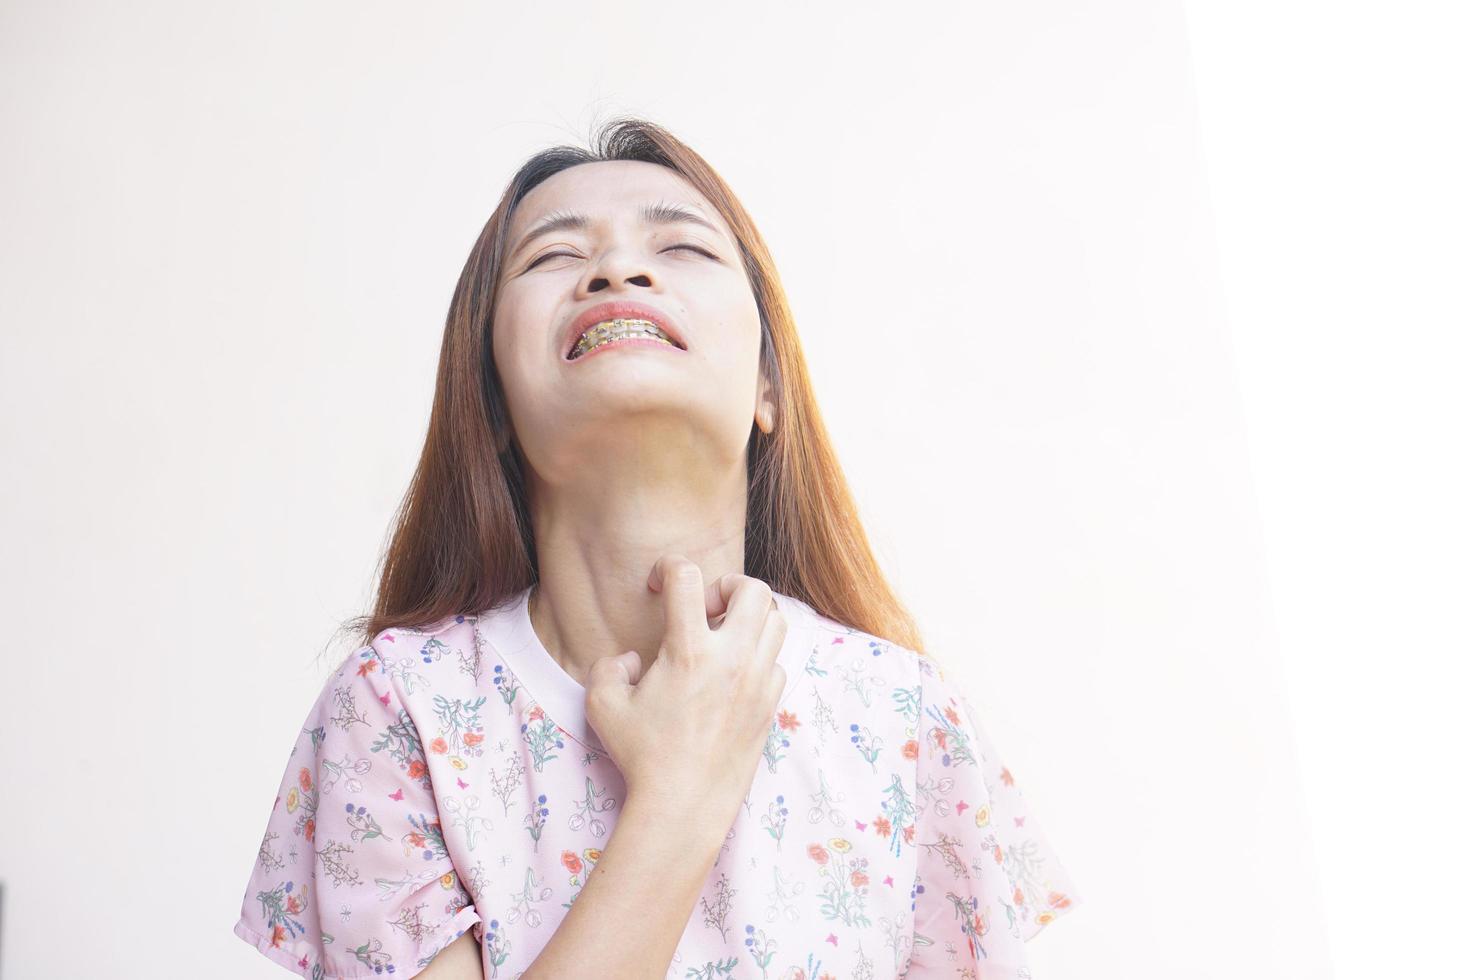 Asian woman having an itchy neck photo